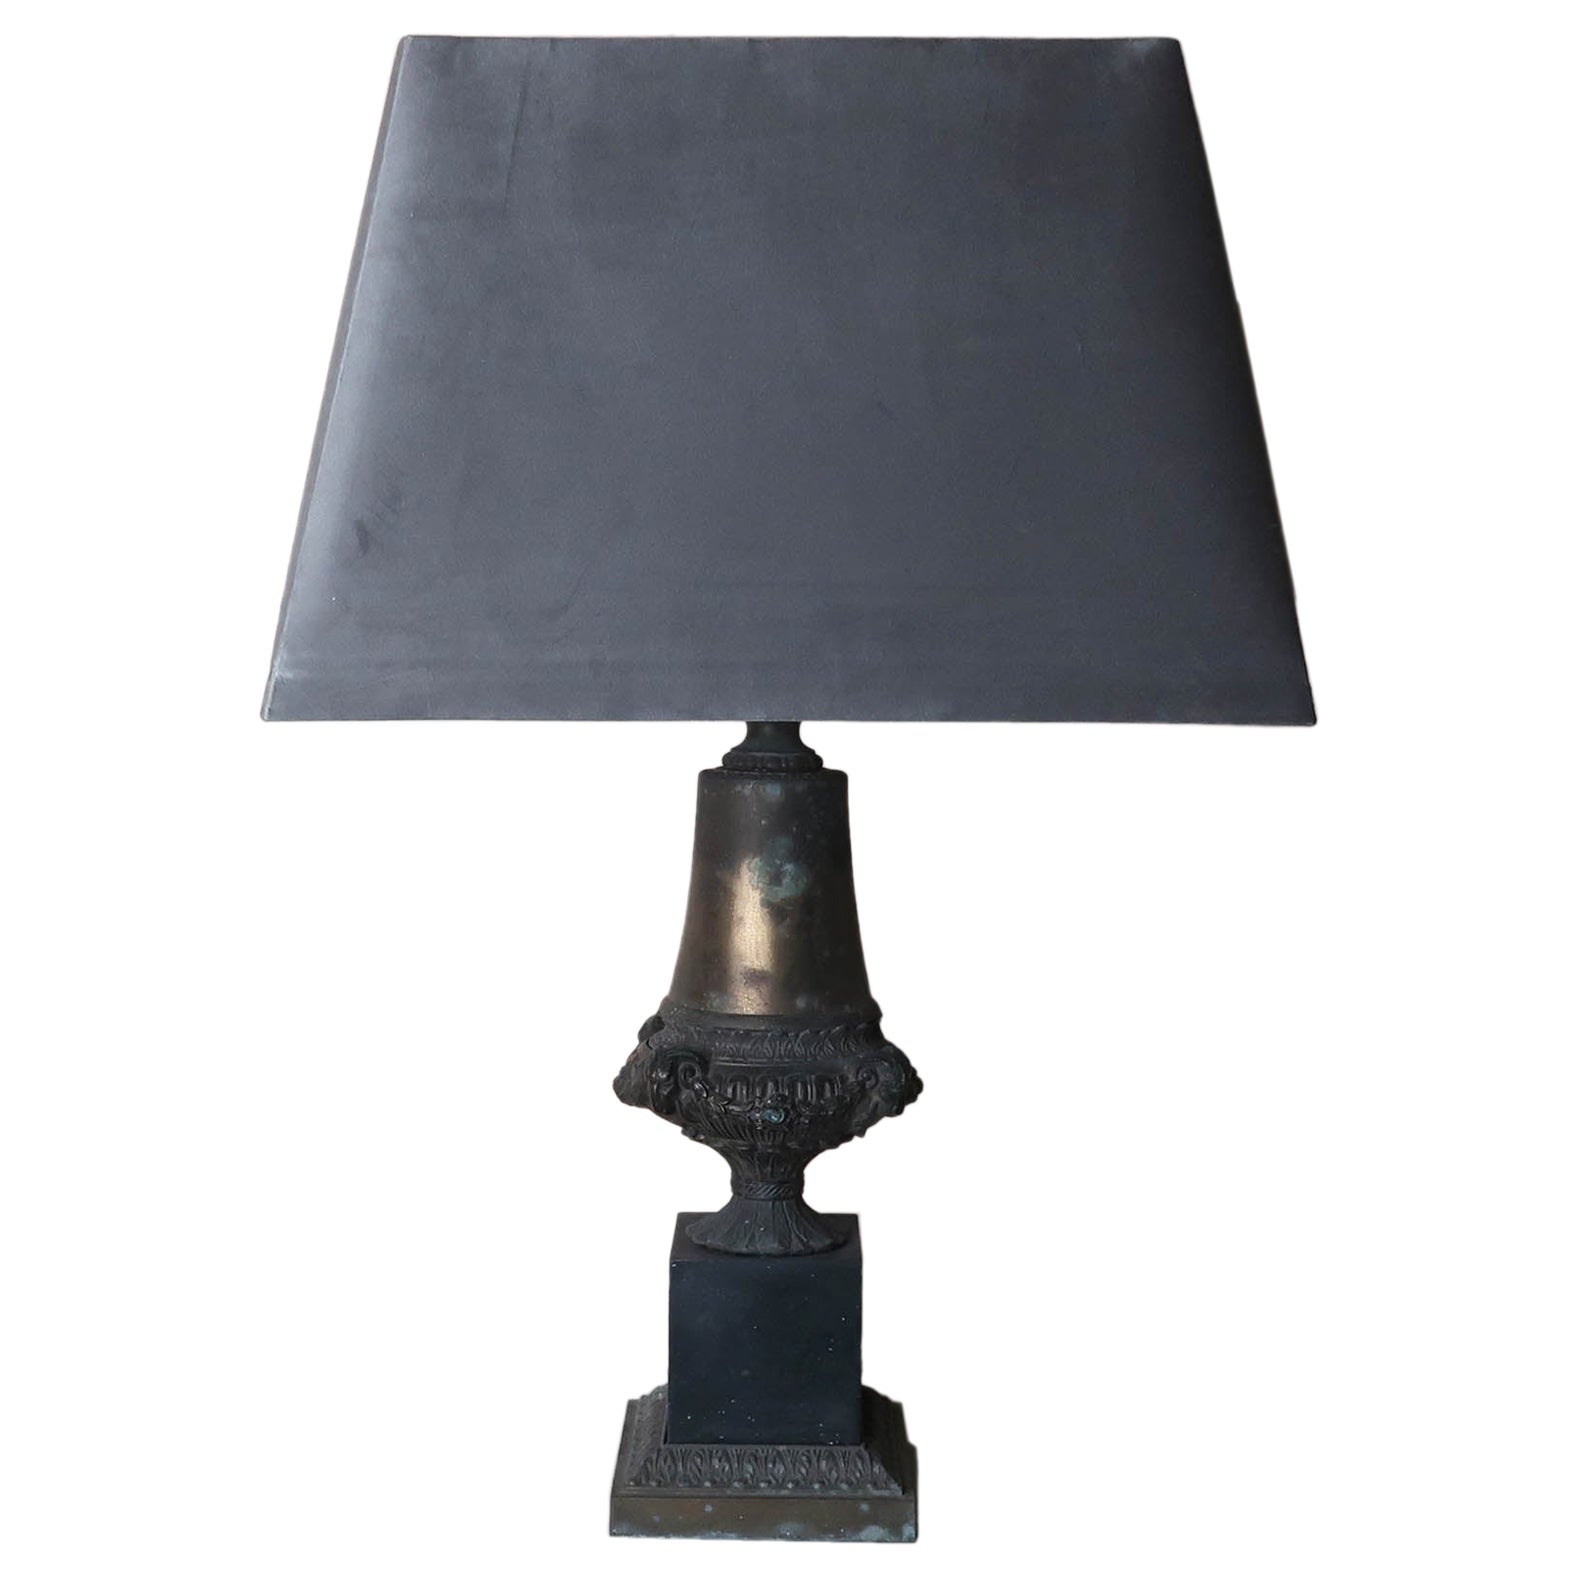 Antique Spelter Table Lamp In Empire Style. French C.1920 For Sale